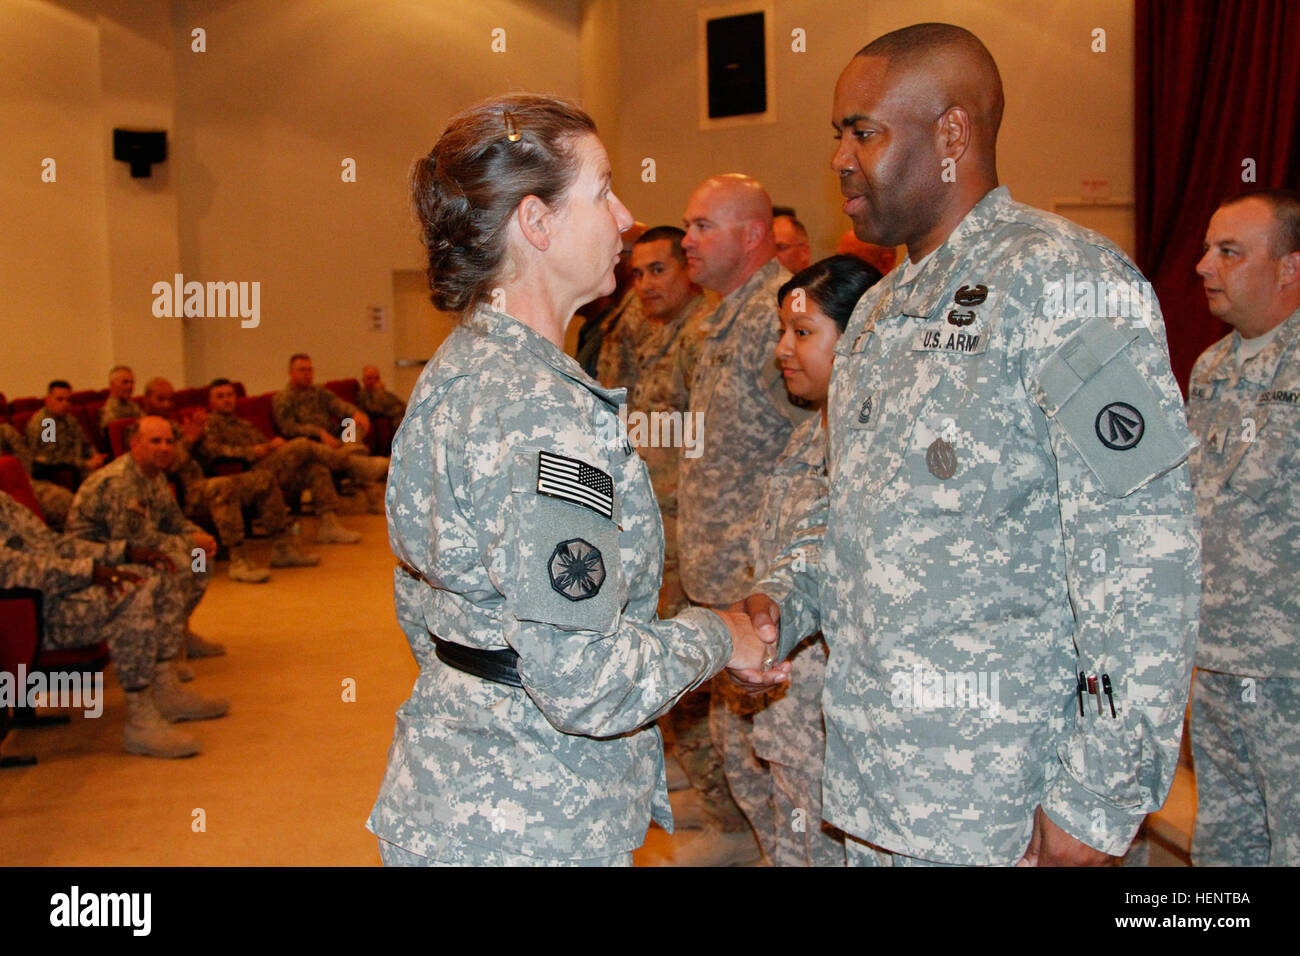 Maj. Gen. Susan A. Davidson, Commanding General of Surface Deployment and Distribution Command, gives a coin to a group of Soldiers who were selected by their respective units for their achievements, after her tour of the unit's operations at Port of Ash Shuaiba, Kuwait City, Kuwait, Sept. 18, 2014. The Soldiers were recognized for their accomplishments while deployed to Kuwait as they help the transition of Afghanistan. (U.S. Army photo by Sgt. Kyle Fisch/ U.S. Army Central Public Affairs) Maj. Gen. Susan A. Davidson Visits 840th Transportation Battalion 140918-A-PK277-321 Stock Photo